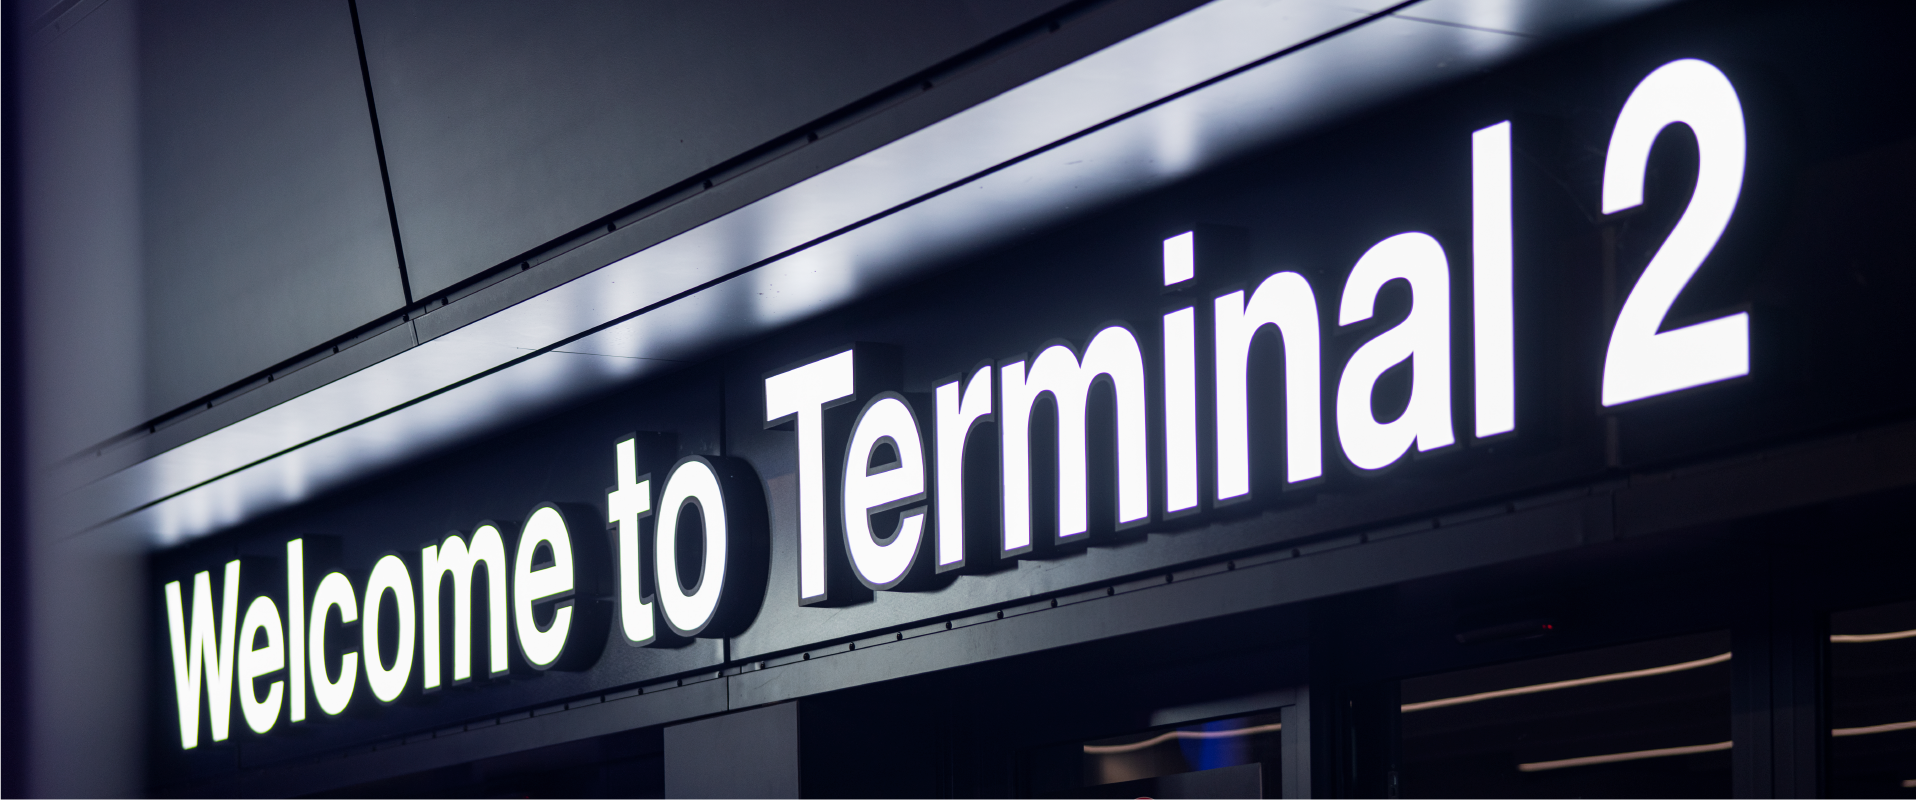 Case Study - Manchester Aiport Terminal 2 Transformation Project